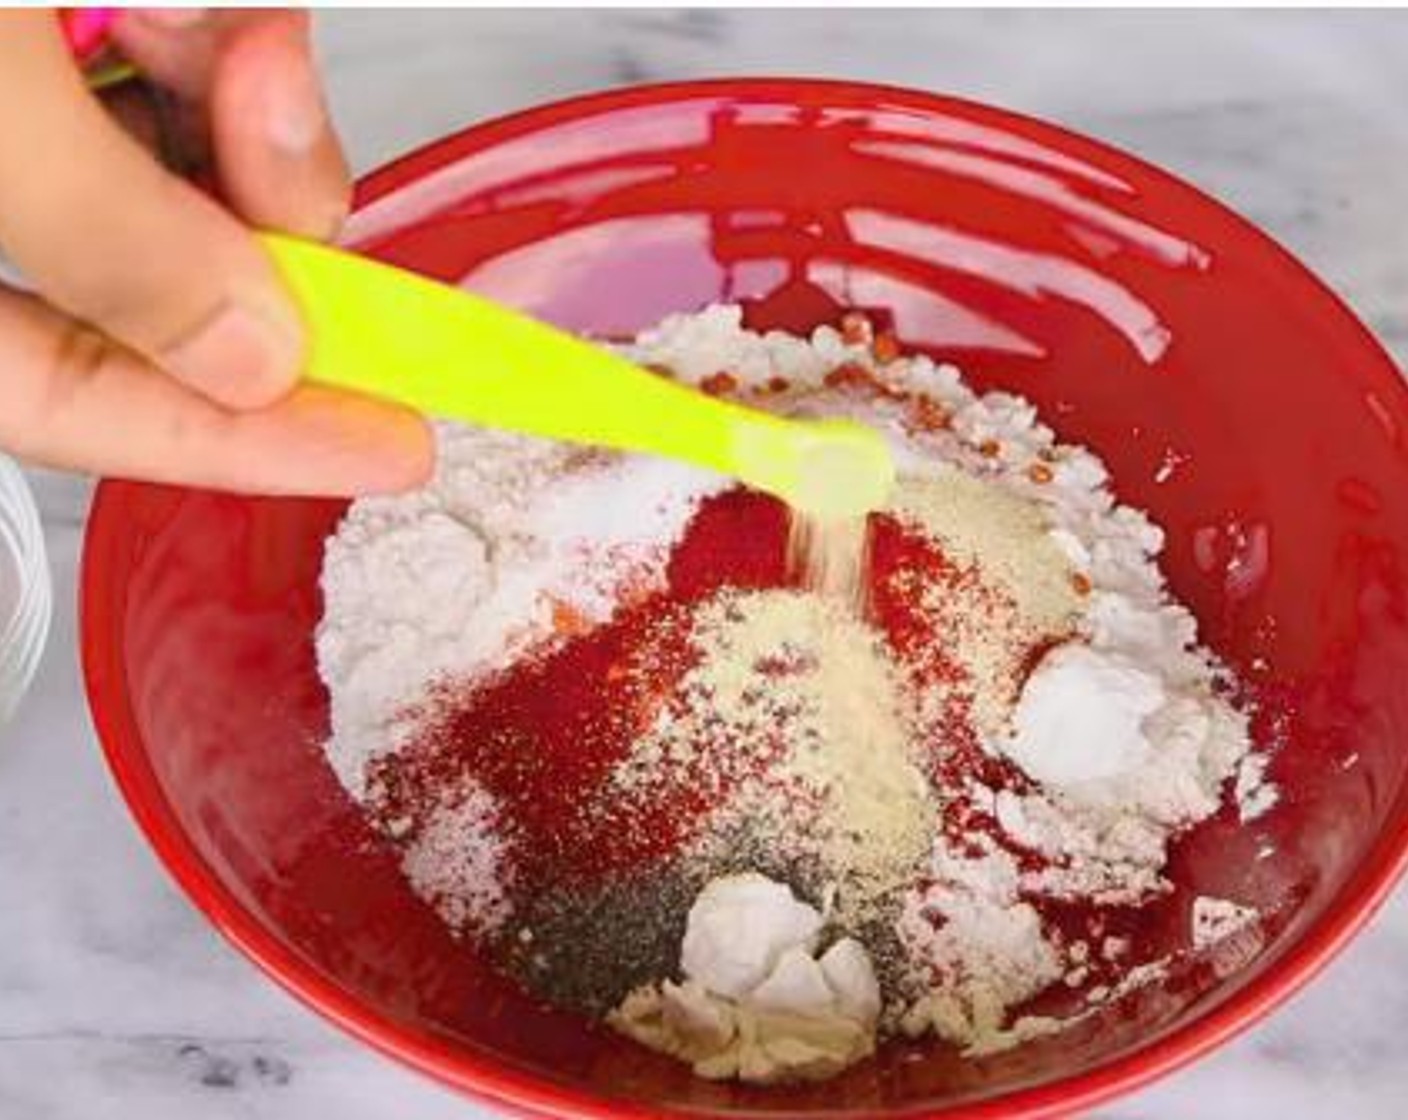 step 3 In a separate bowl, mix together the All-Purpose Flour (1 cup), Cayenne Pepper (1 Tbsp), Salt (1 tsp), Ground Black Pepper (1 tsp), Onion Powder (1 tsp), Paprika (1/2 tsp), and McCormick® Garlic Powder (1/8 tsp).